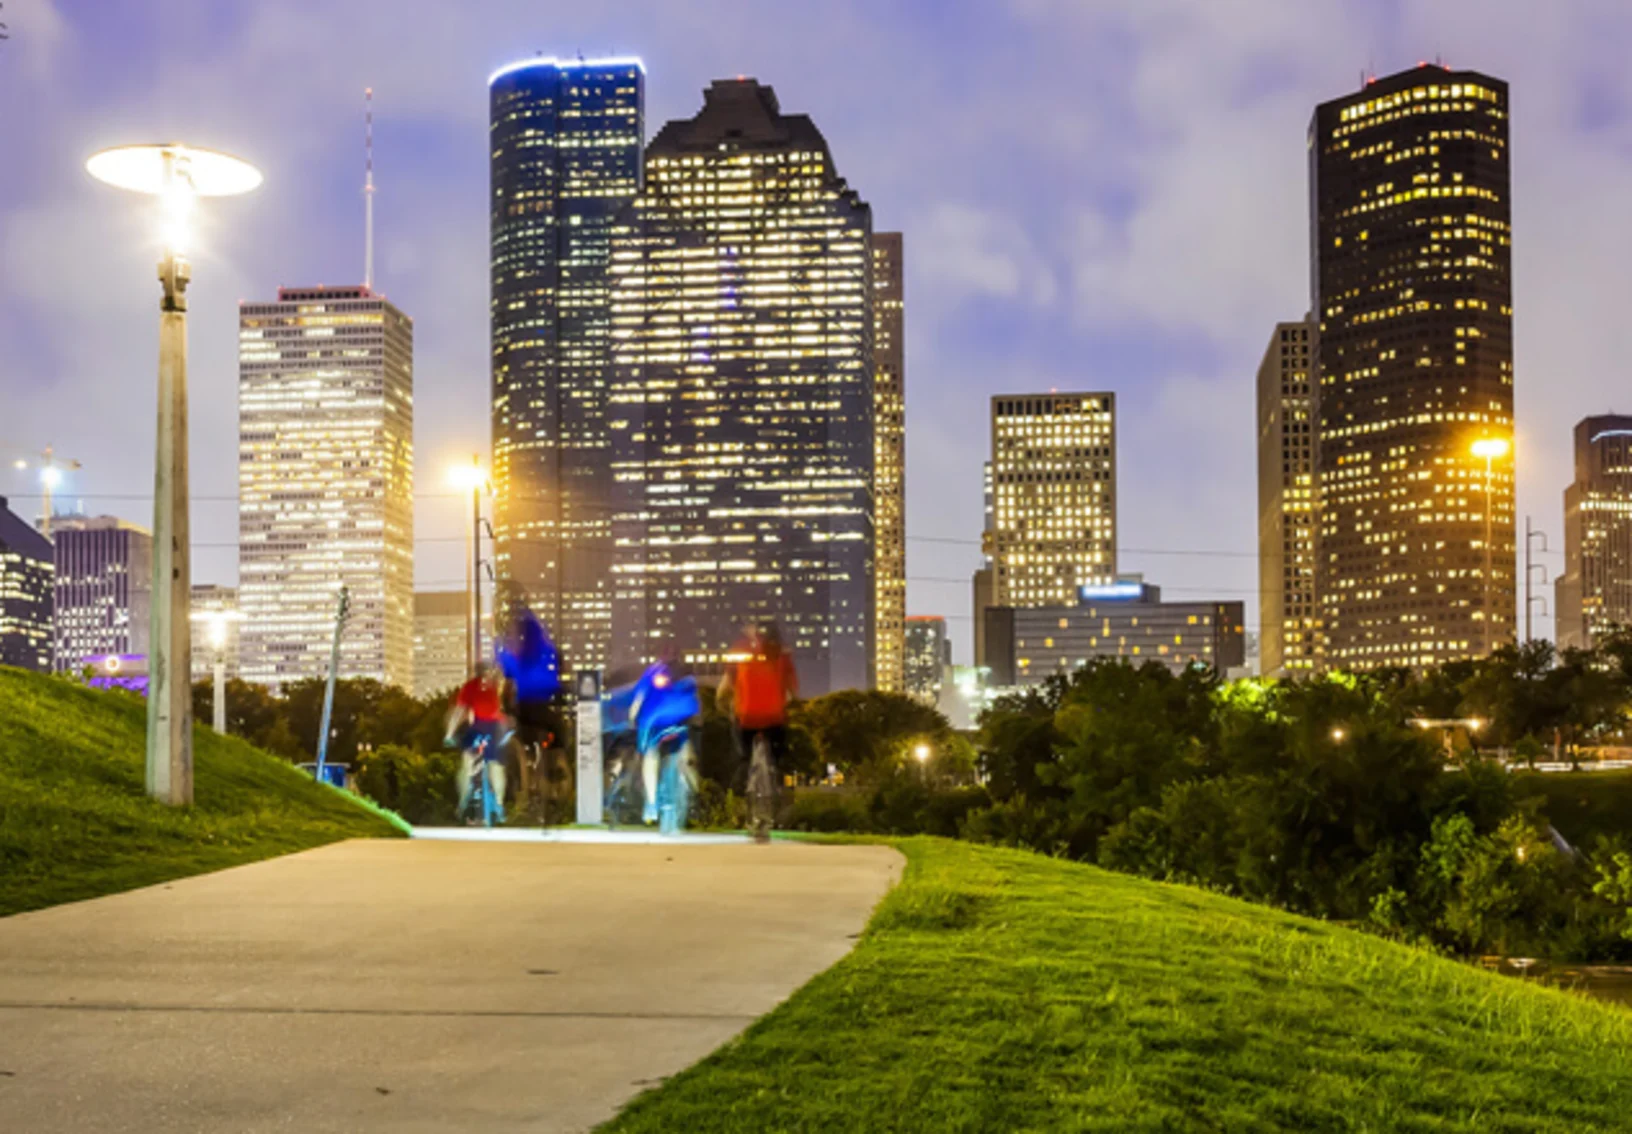 people walk through a park with the Houston, TX skyline in the background